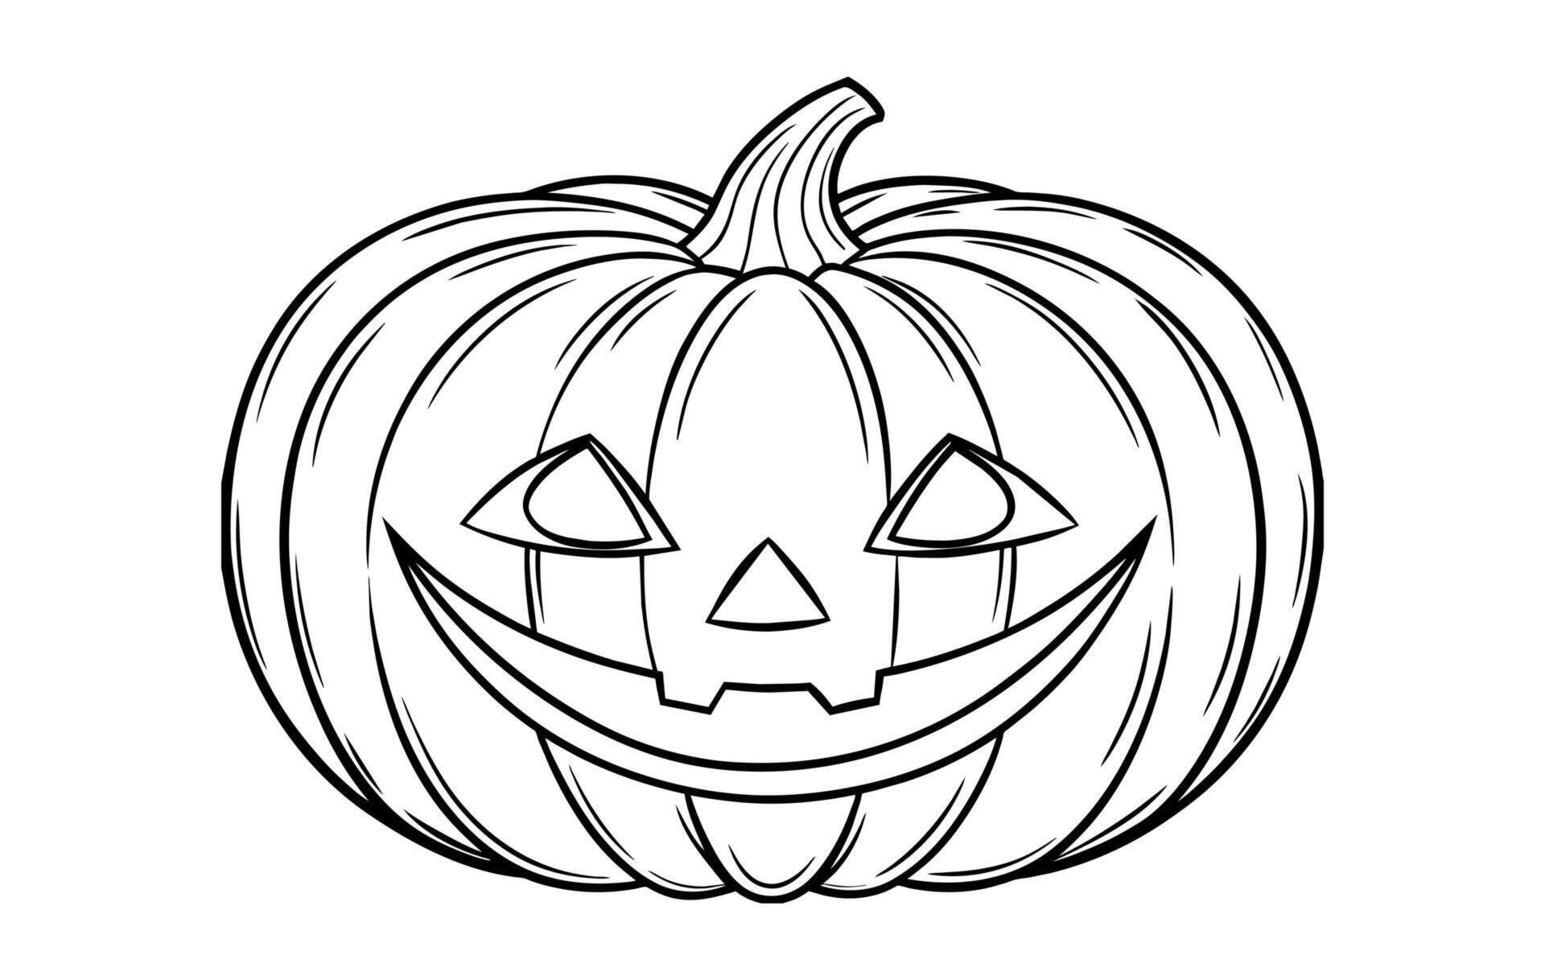 Carved pumpkin illustration for Halloween. Black and white outline drawing of smiling jack-o-lantern. Concept of Halloween, coloring activity, spooky fun, holiday decorations. vector